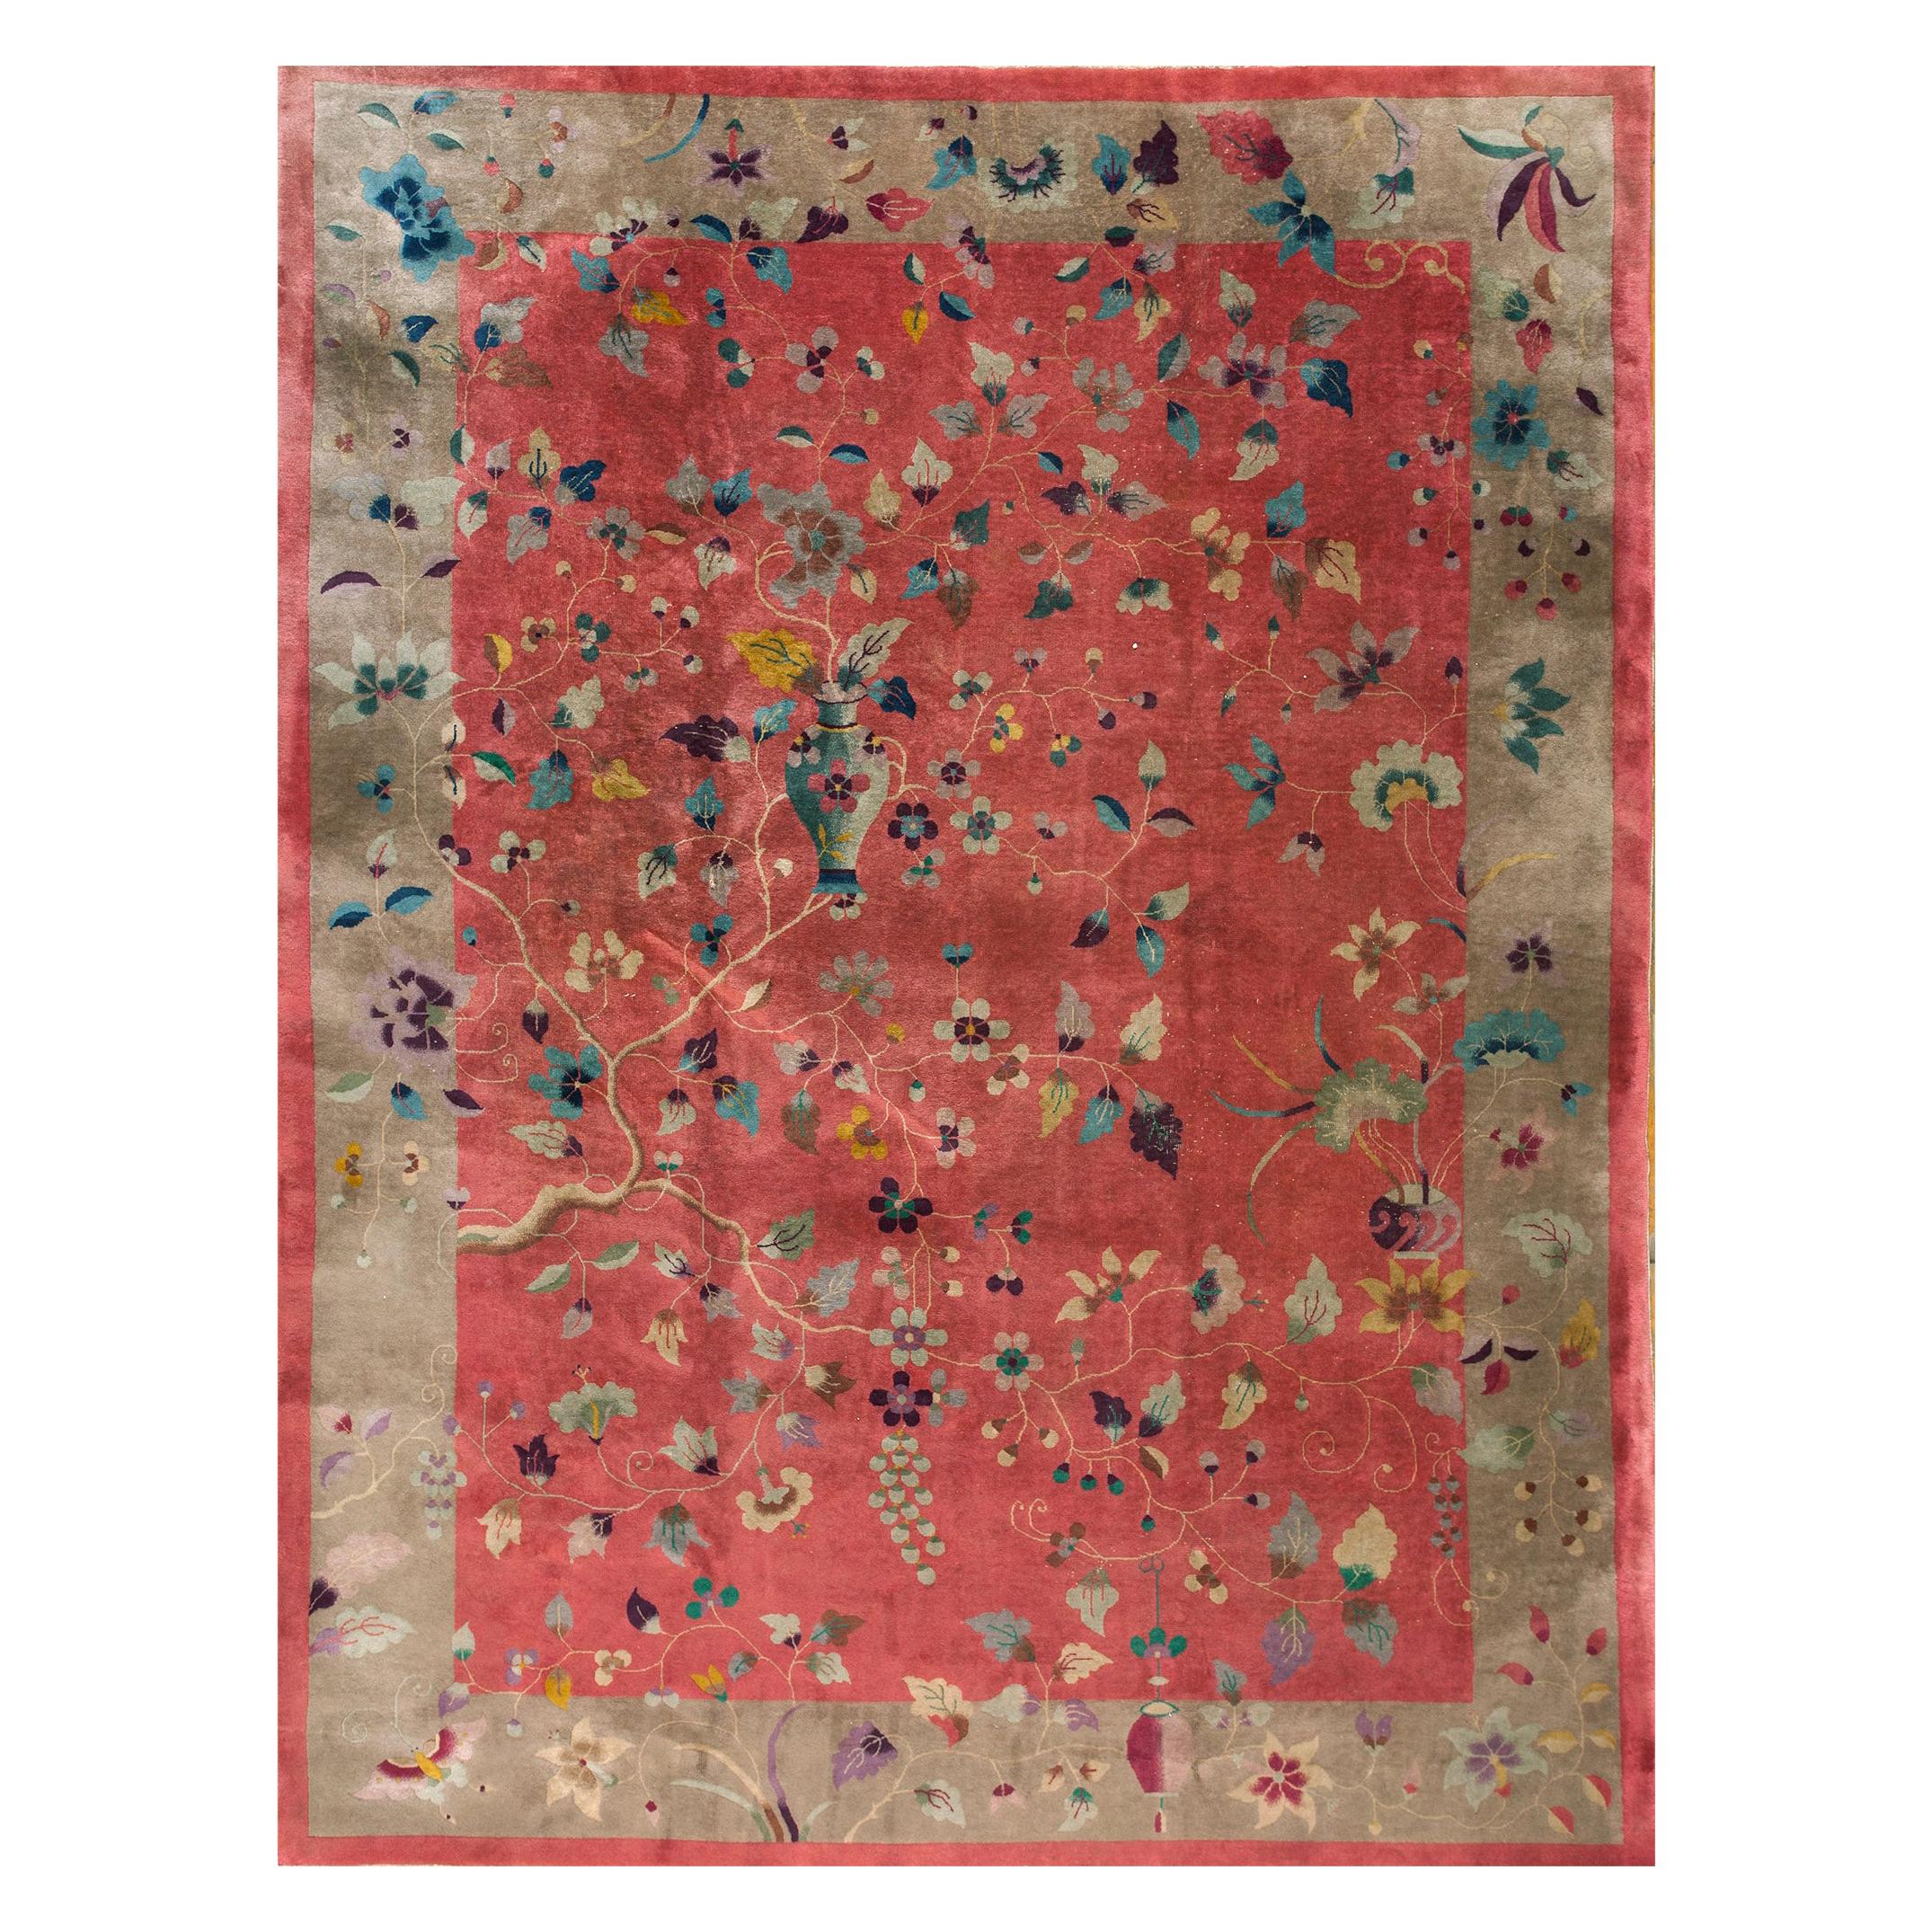 1920s Chinese Art Deco Carpet ( 8'9" x 11'6" - 266 x 350 ) For Sale